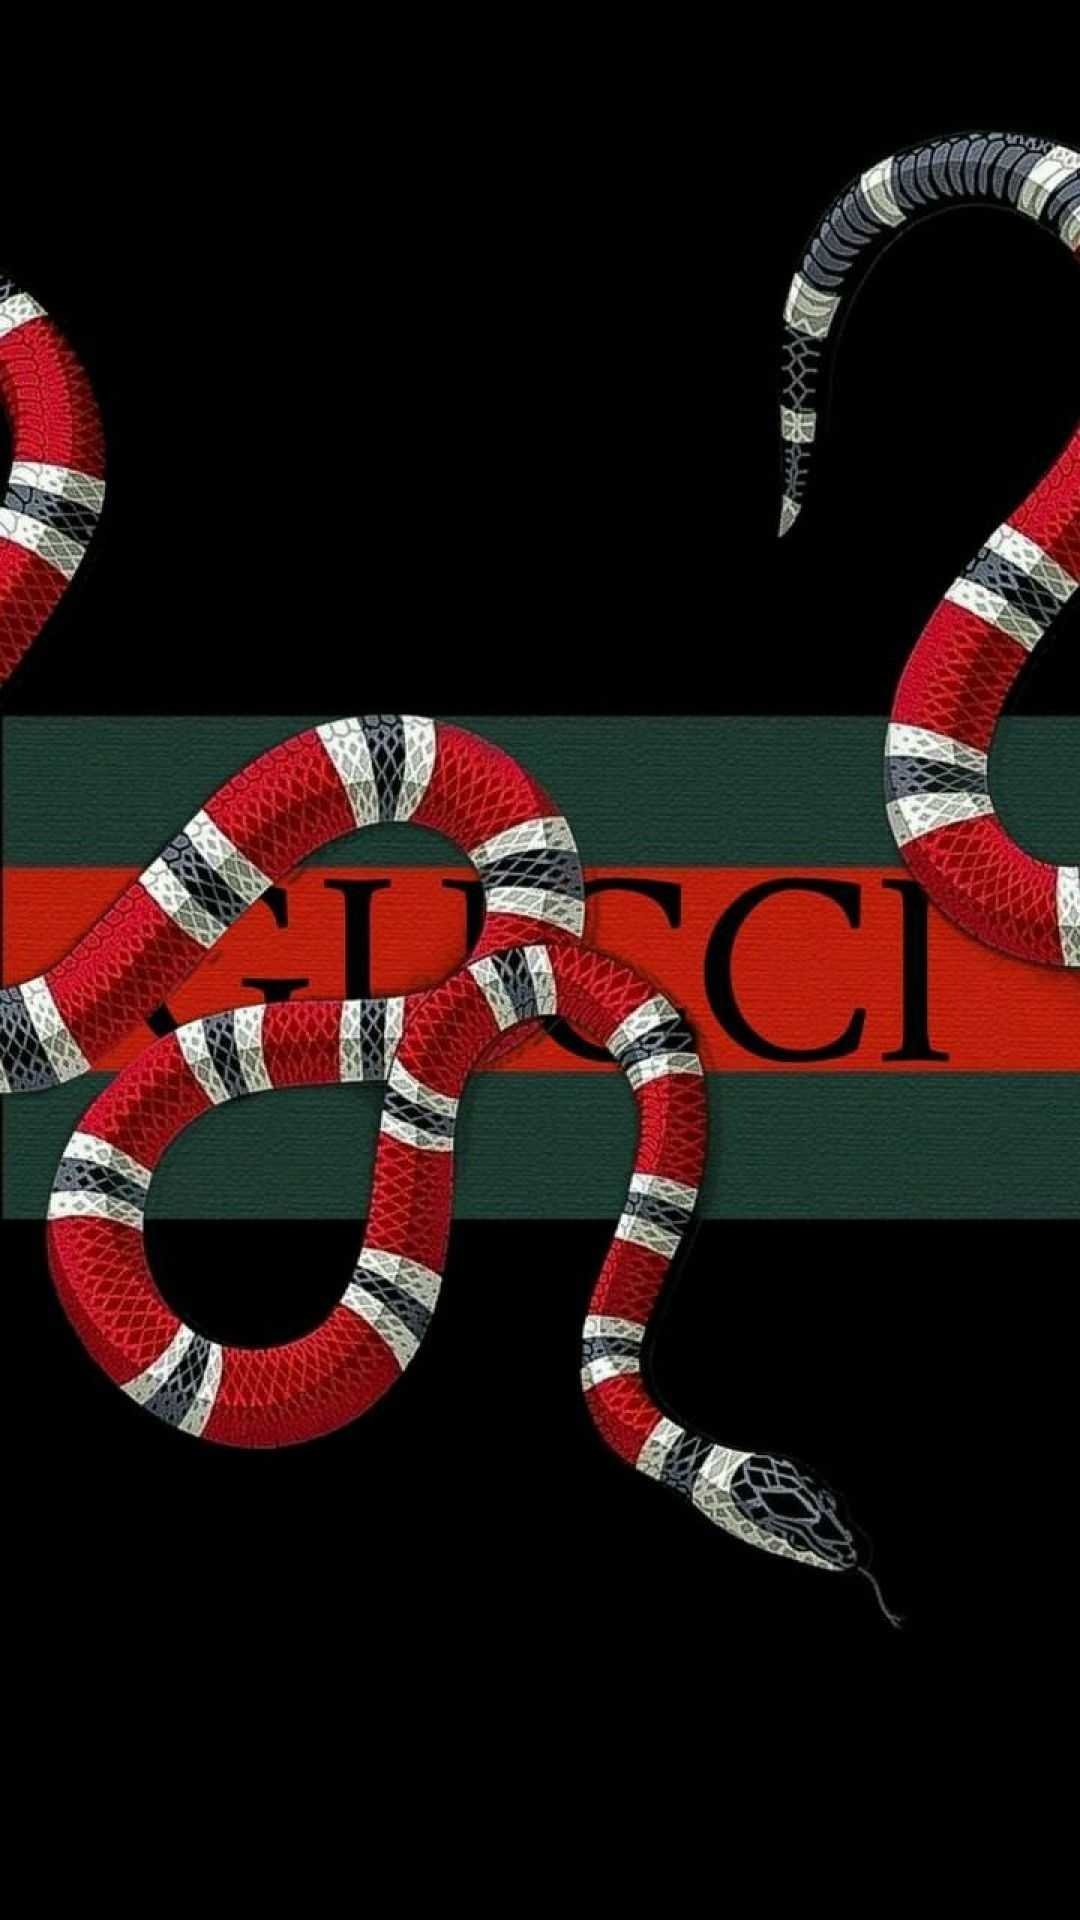 Awesome Gucci wallpaper, High definition images, Luxury fashion, Trendy designs, 1080x1920 Full HD Phone